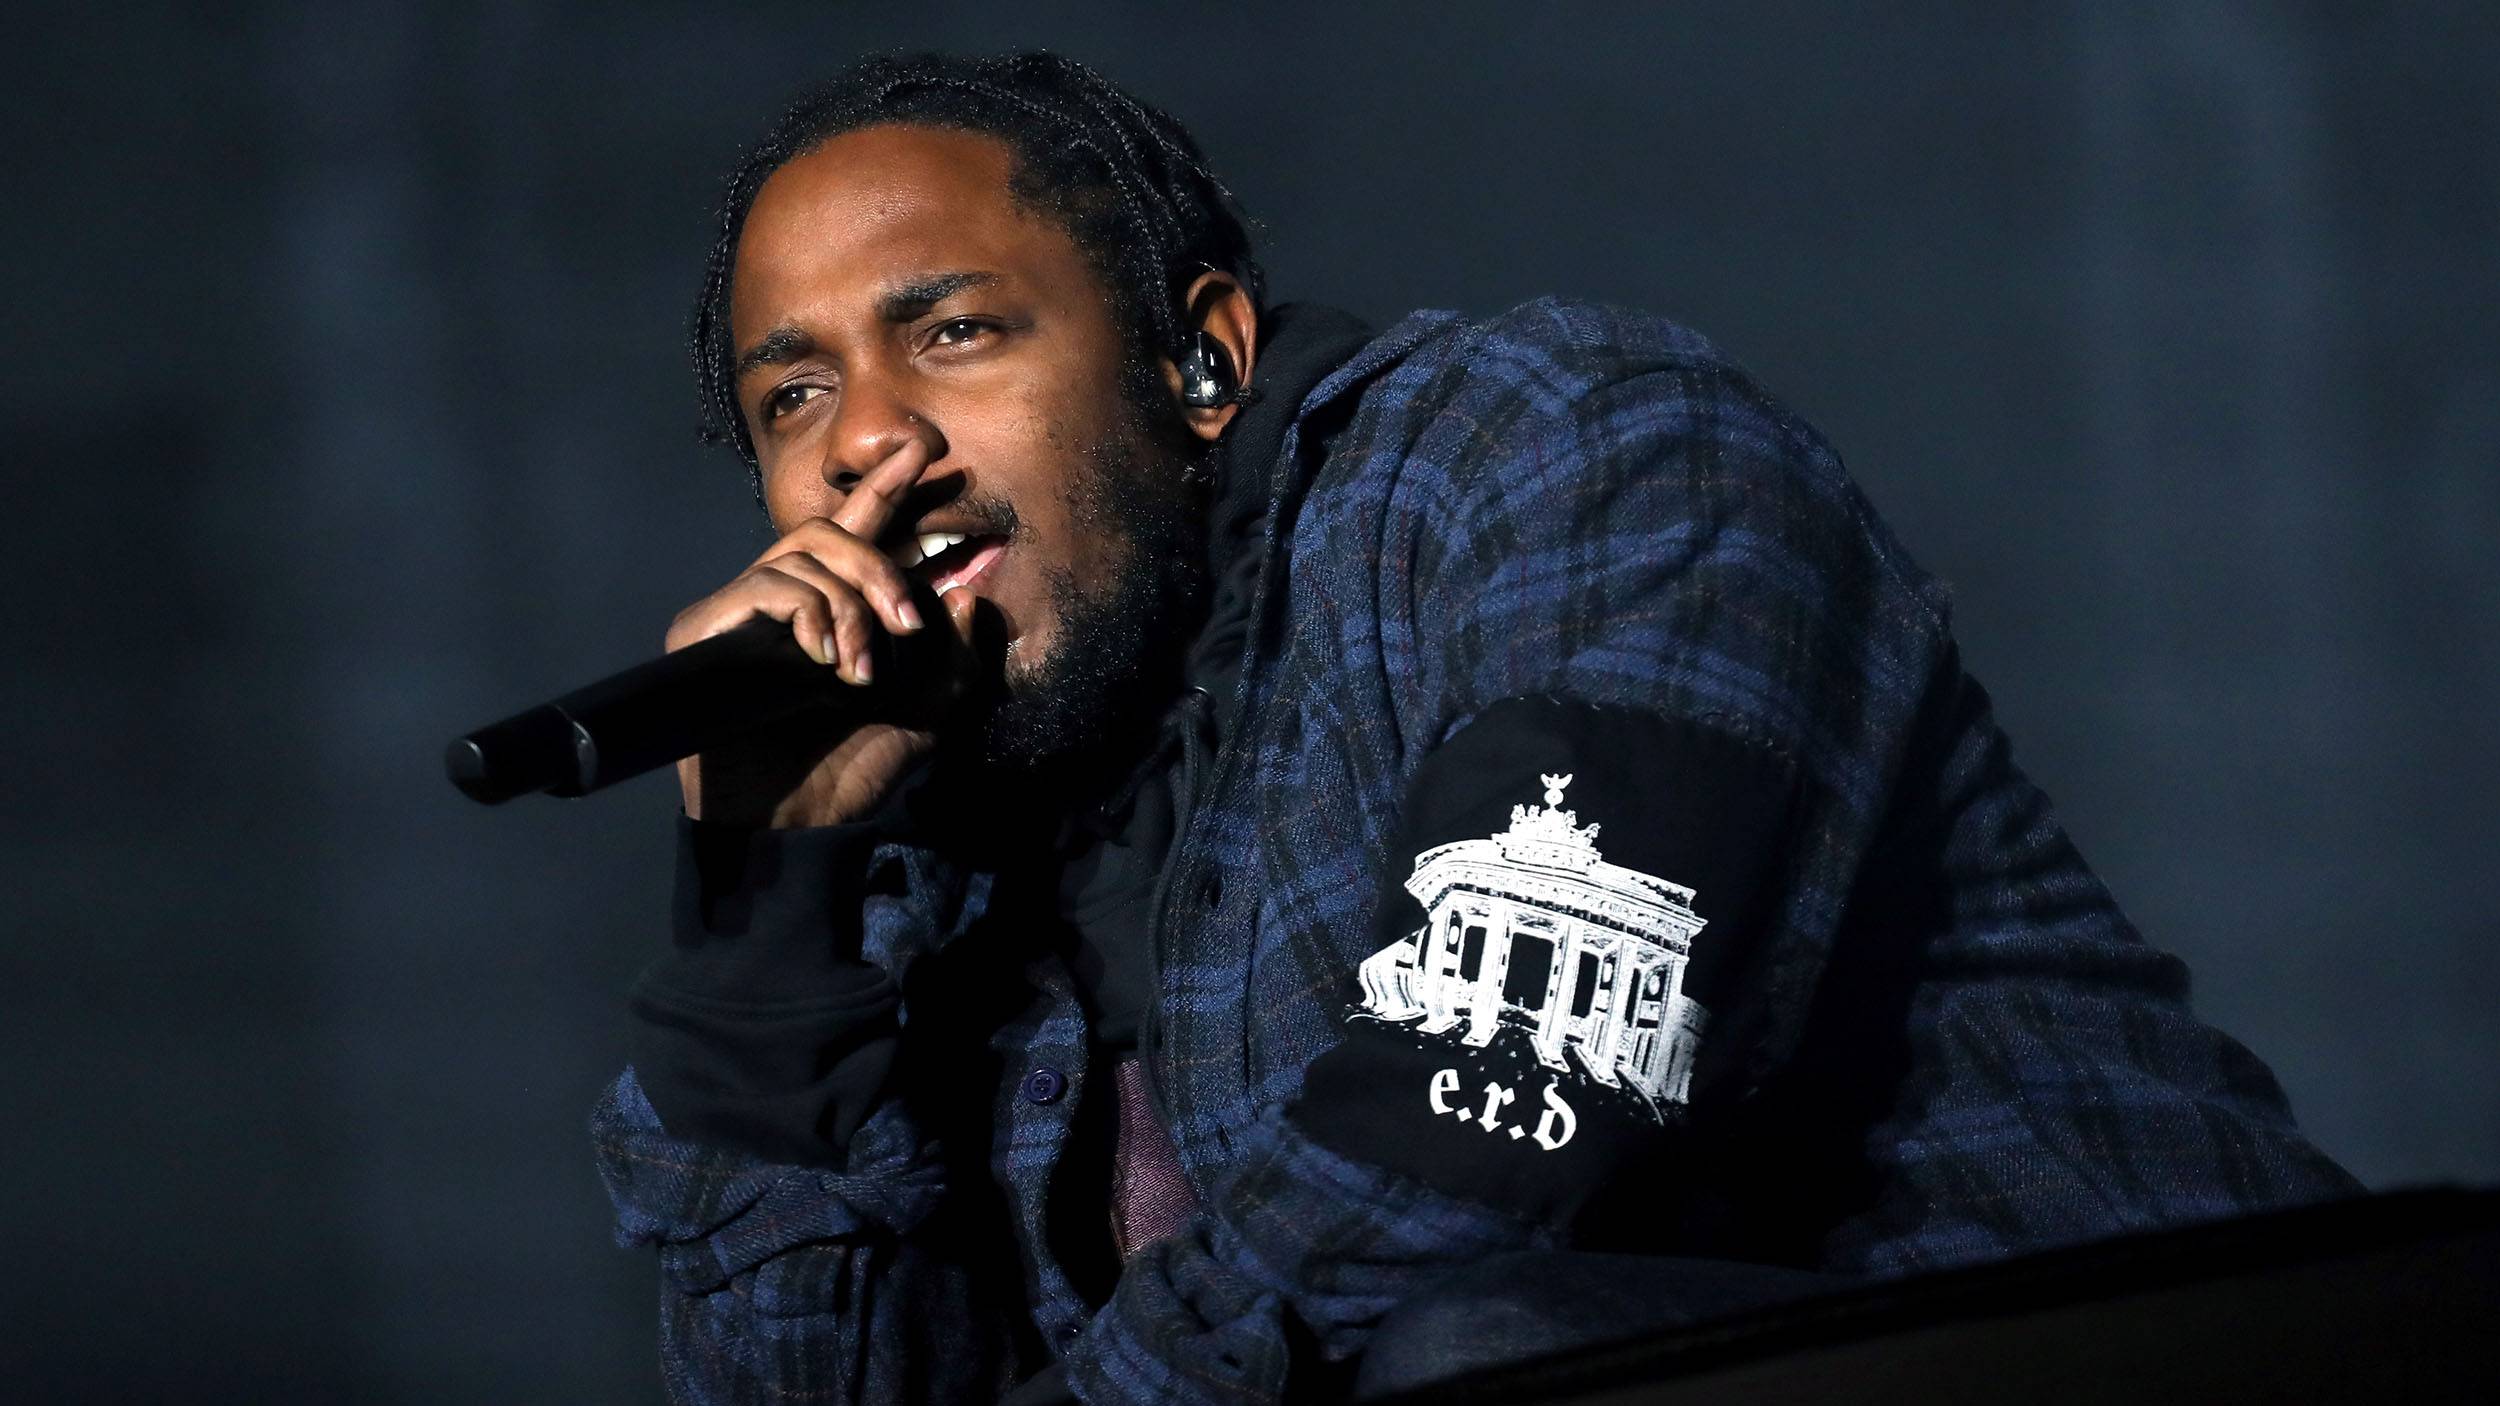 AHEAD OF HIS SUPERBOWL PERFORMANCE, HERE ARE SOME OF KENDRICK